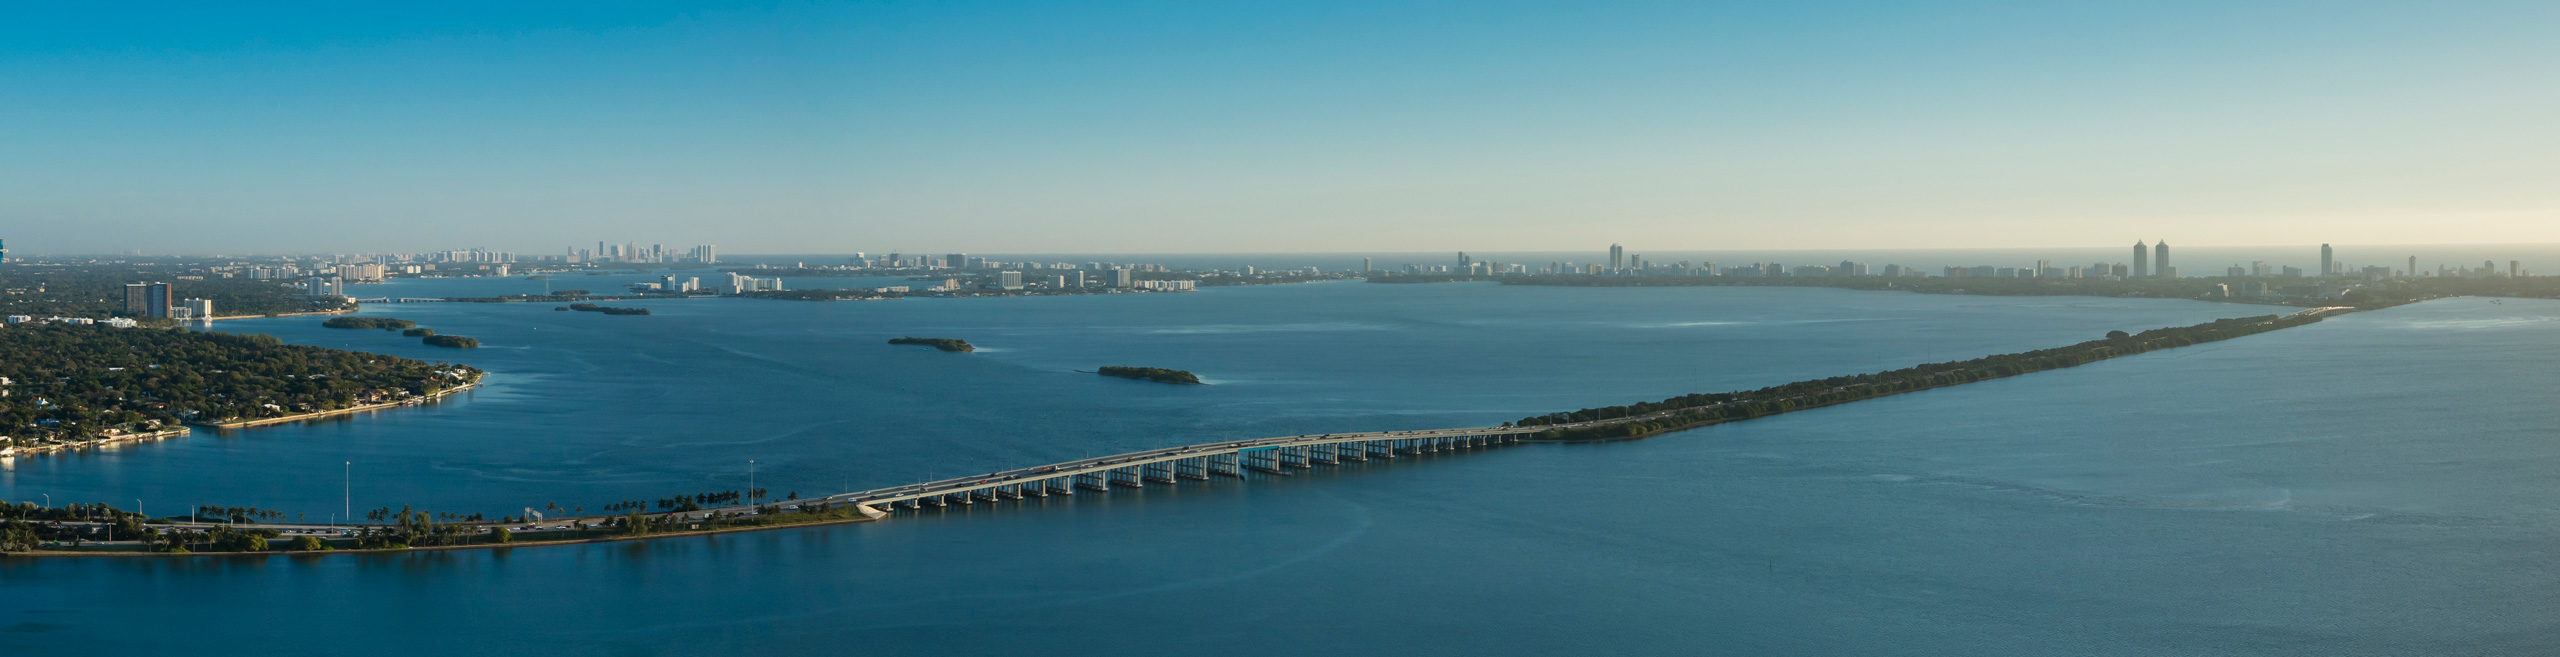 Biscayne Bay Miami North View